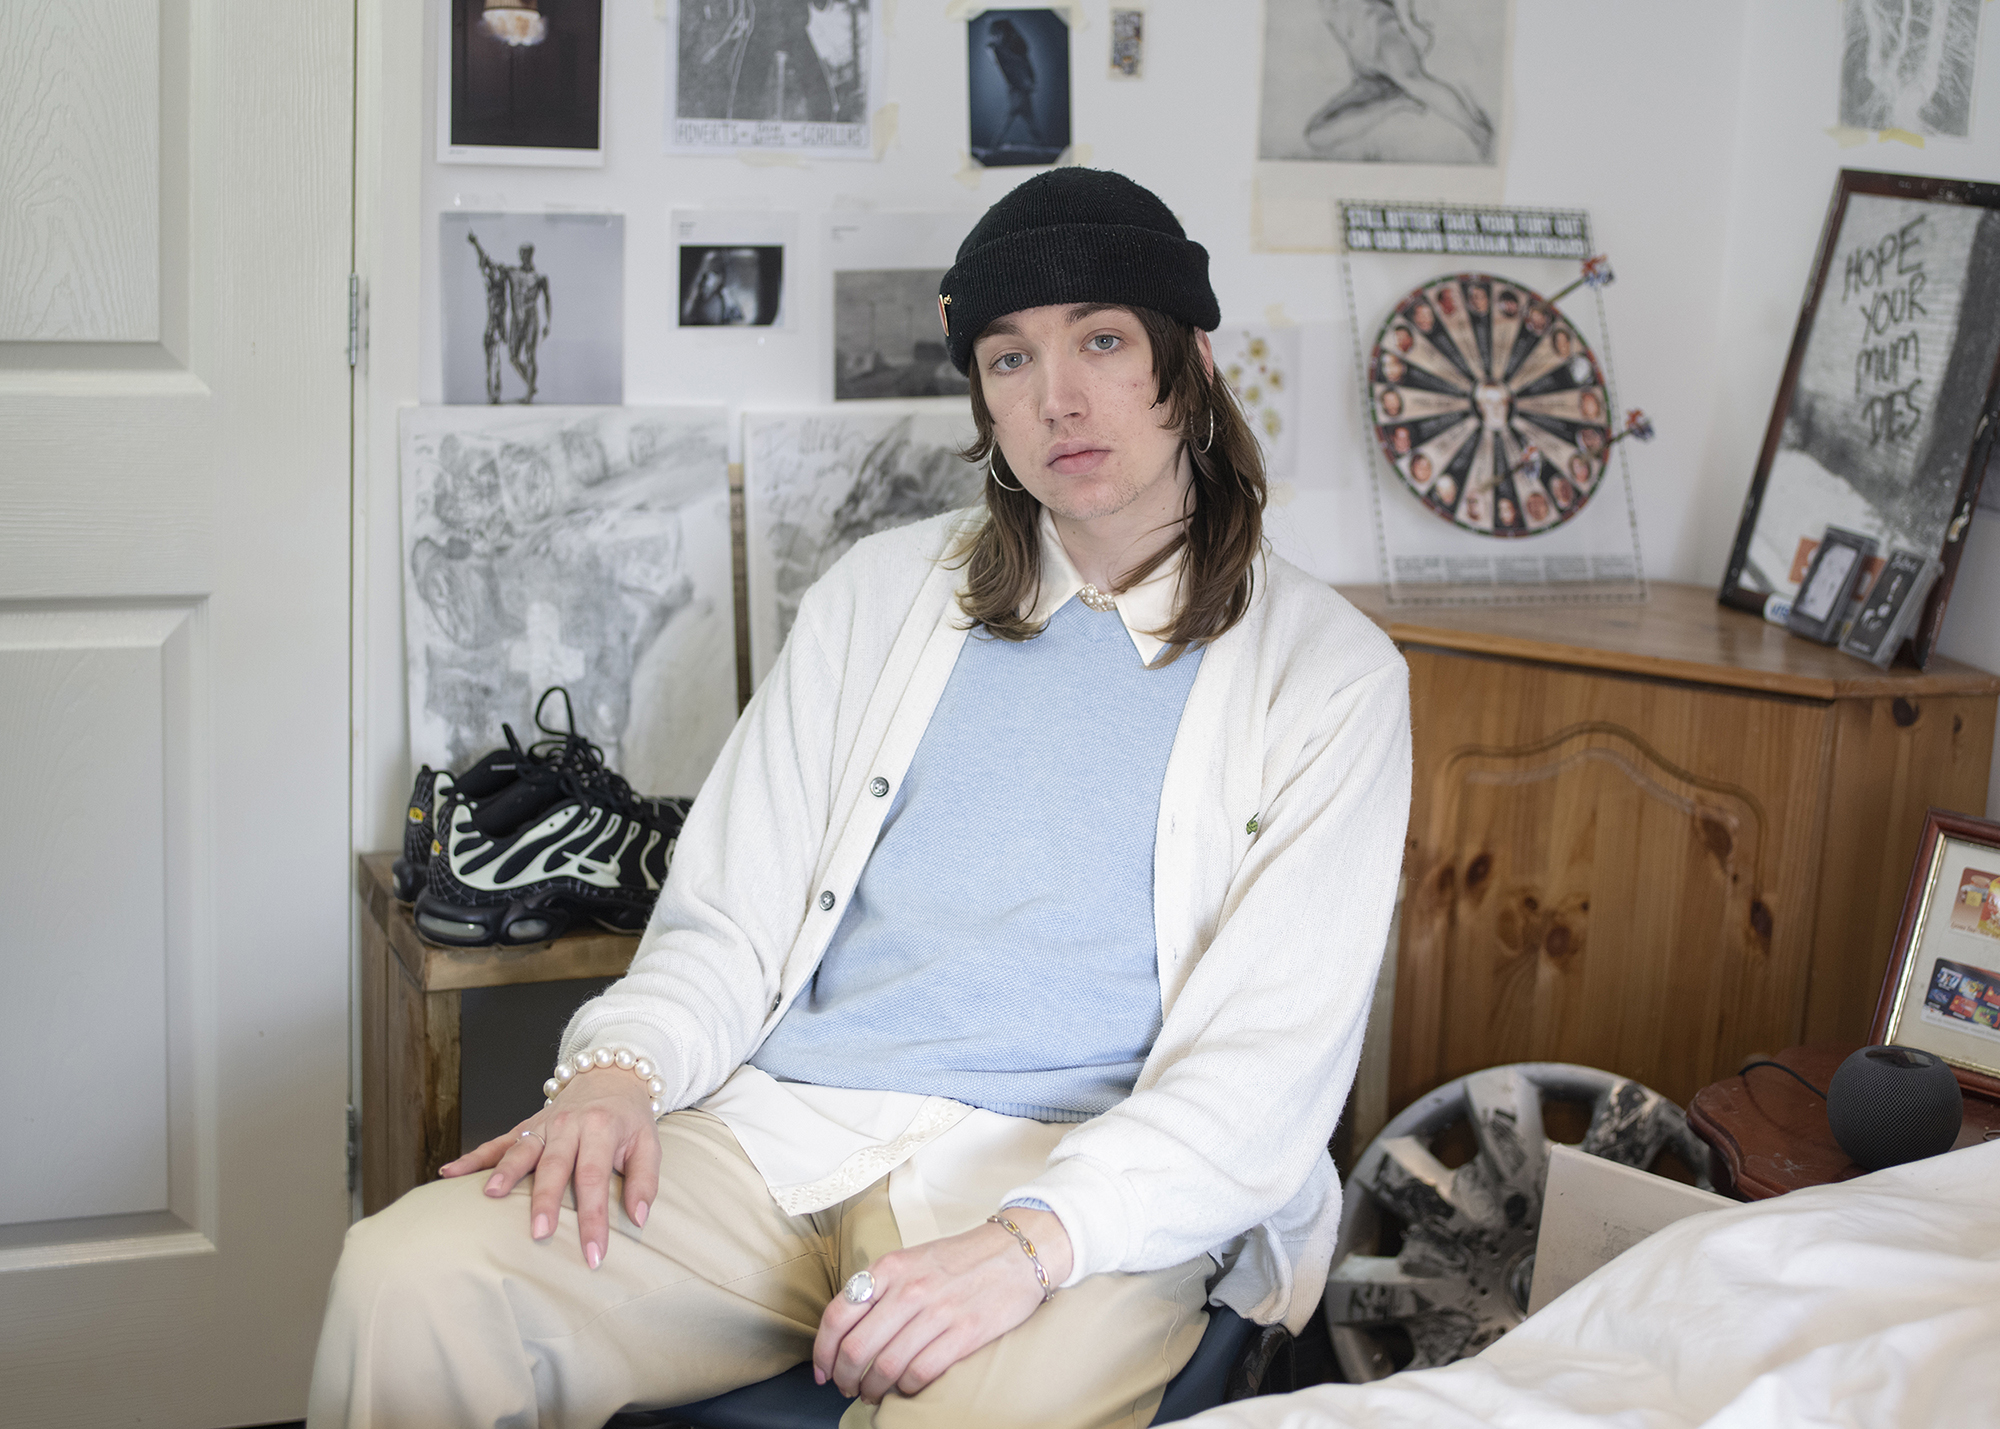 BA Photography work by Hannah Jayne showing a documentary style portrait of a male dressed in cream tones, sat in his room surrounded by prints and art work plastering his walls.